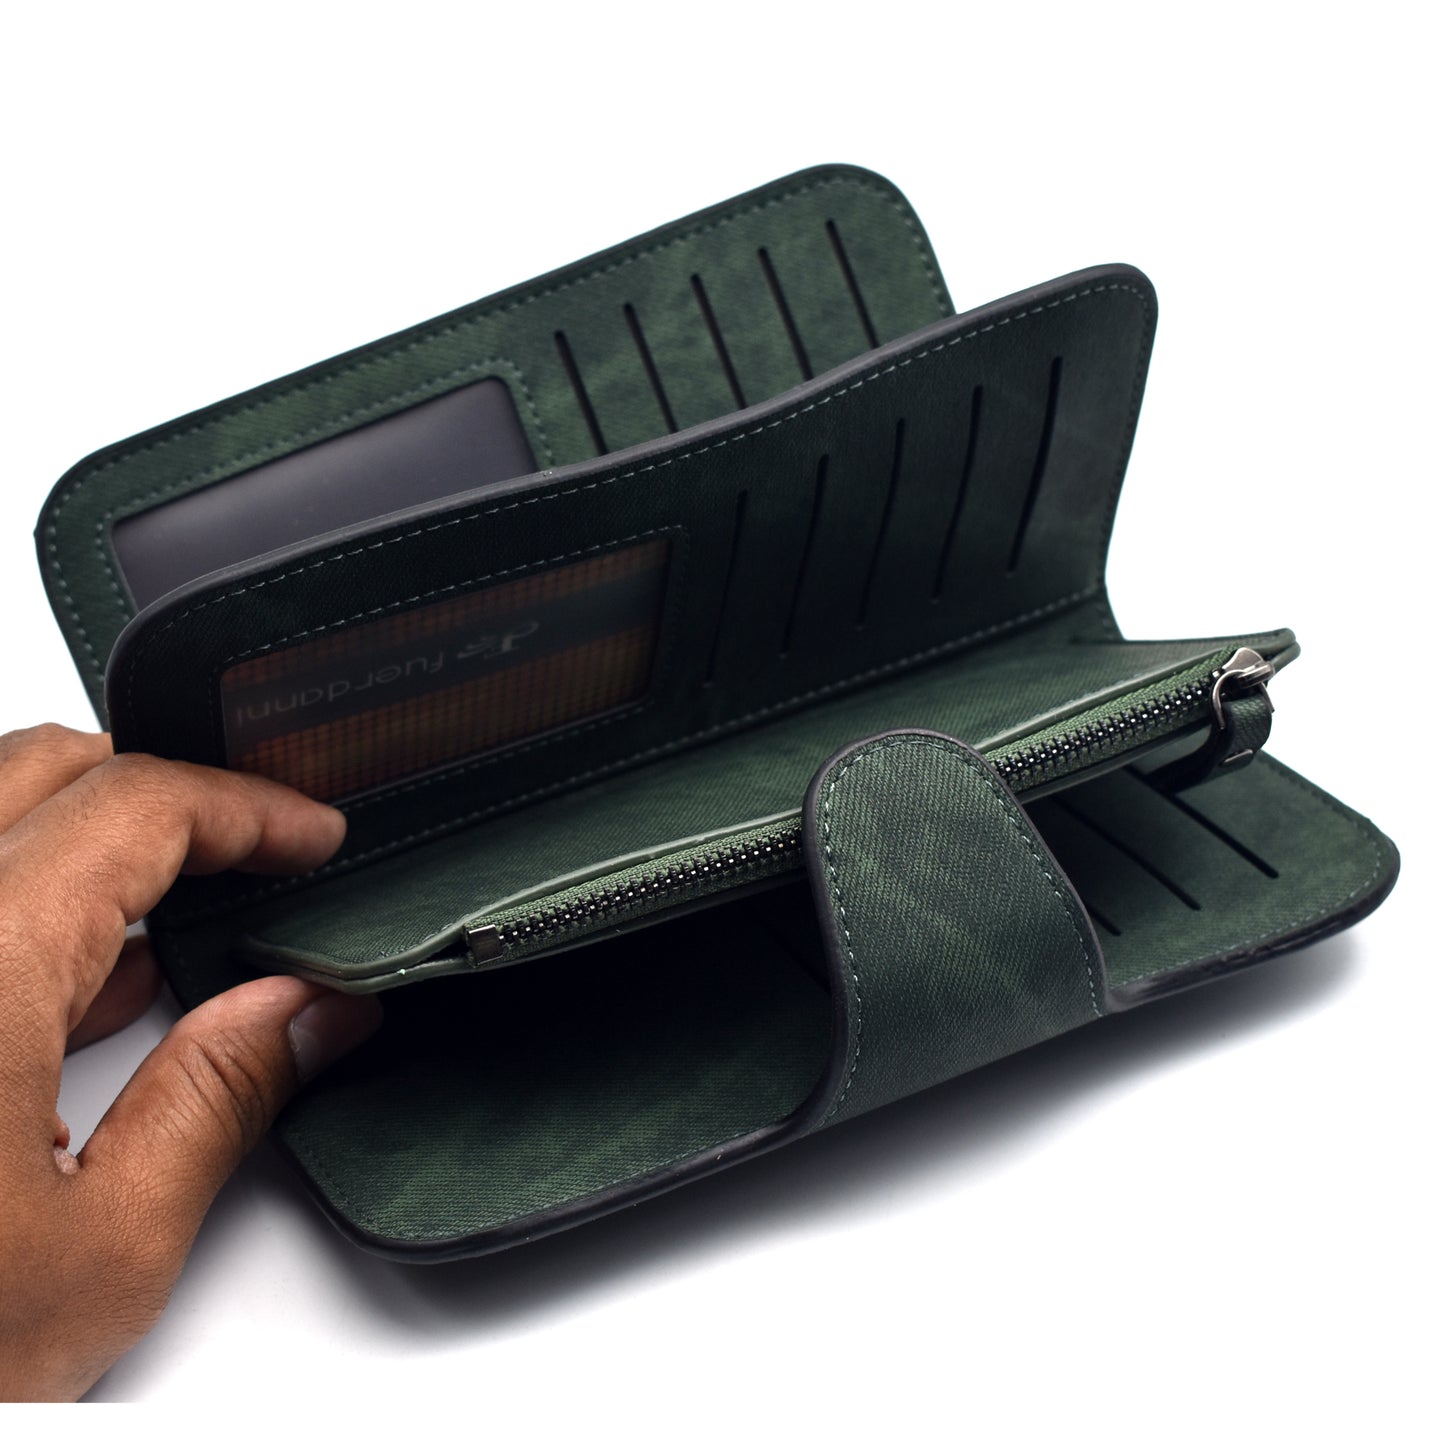 Fuerdanni Long Multi Purpose Wallet Imported from China | Fuerdanni 05 A